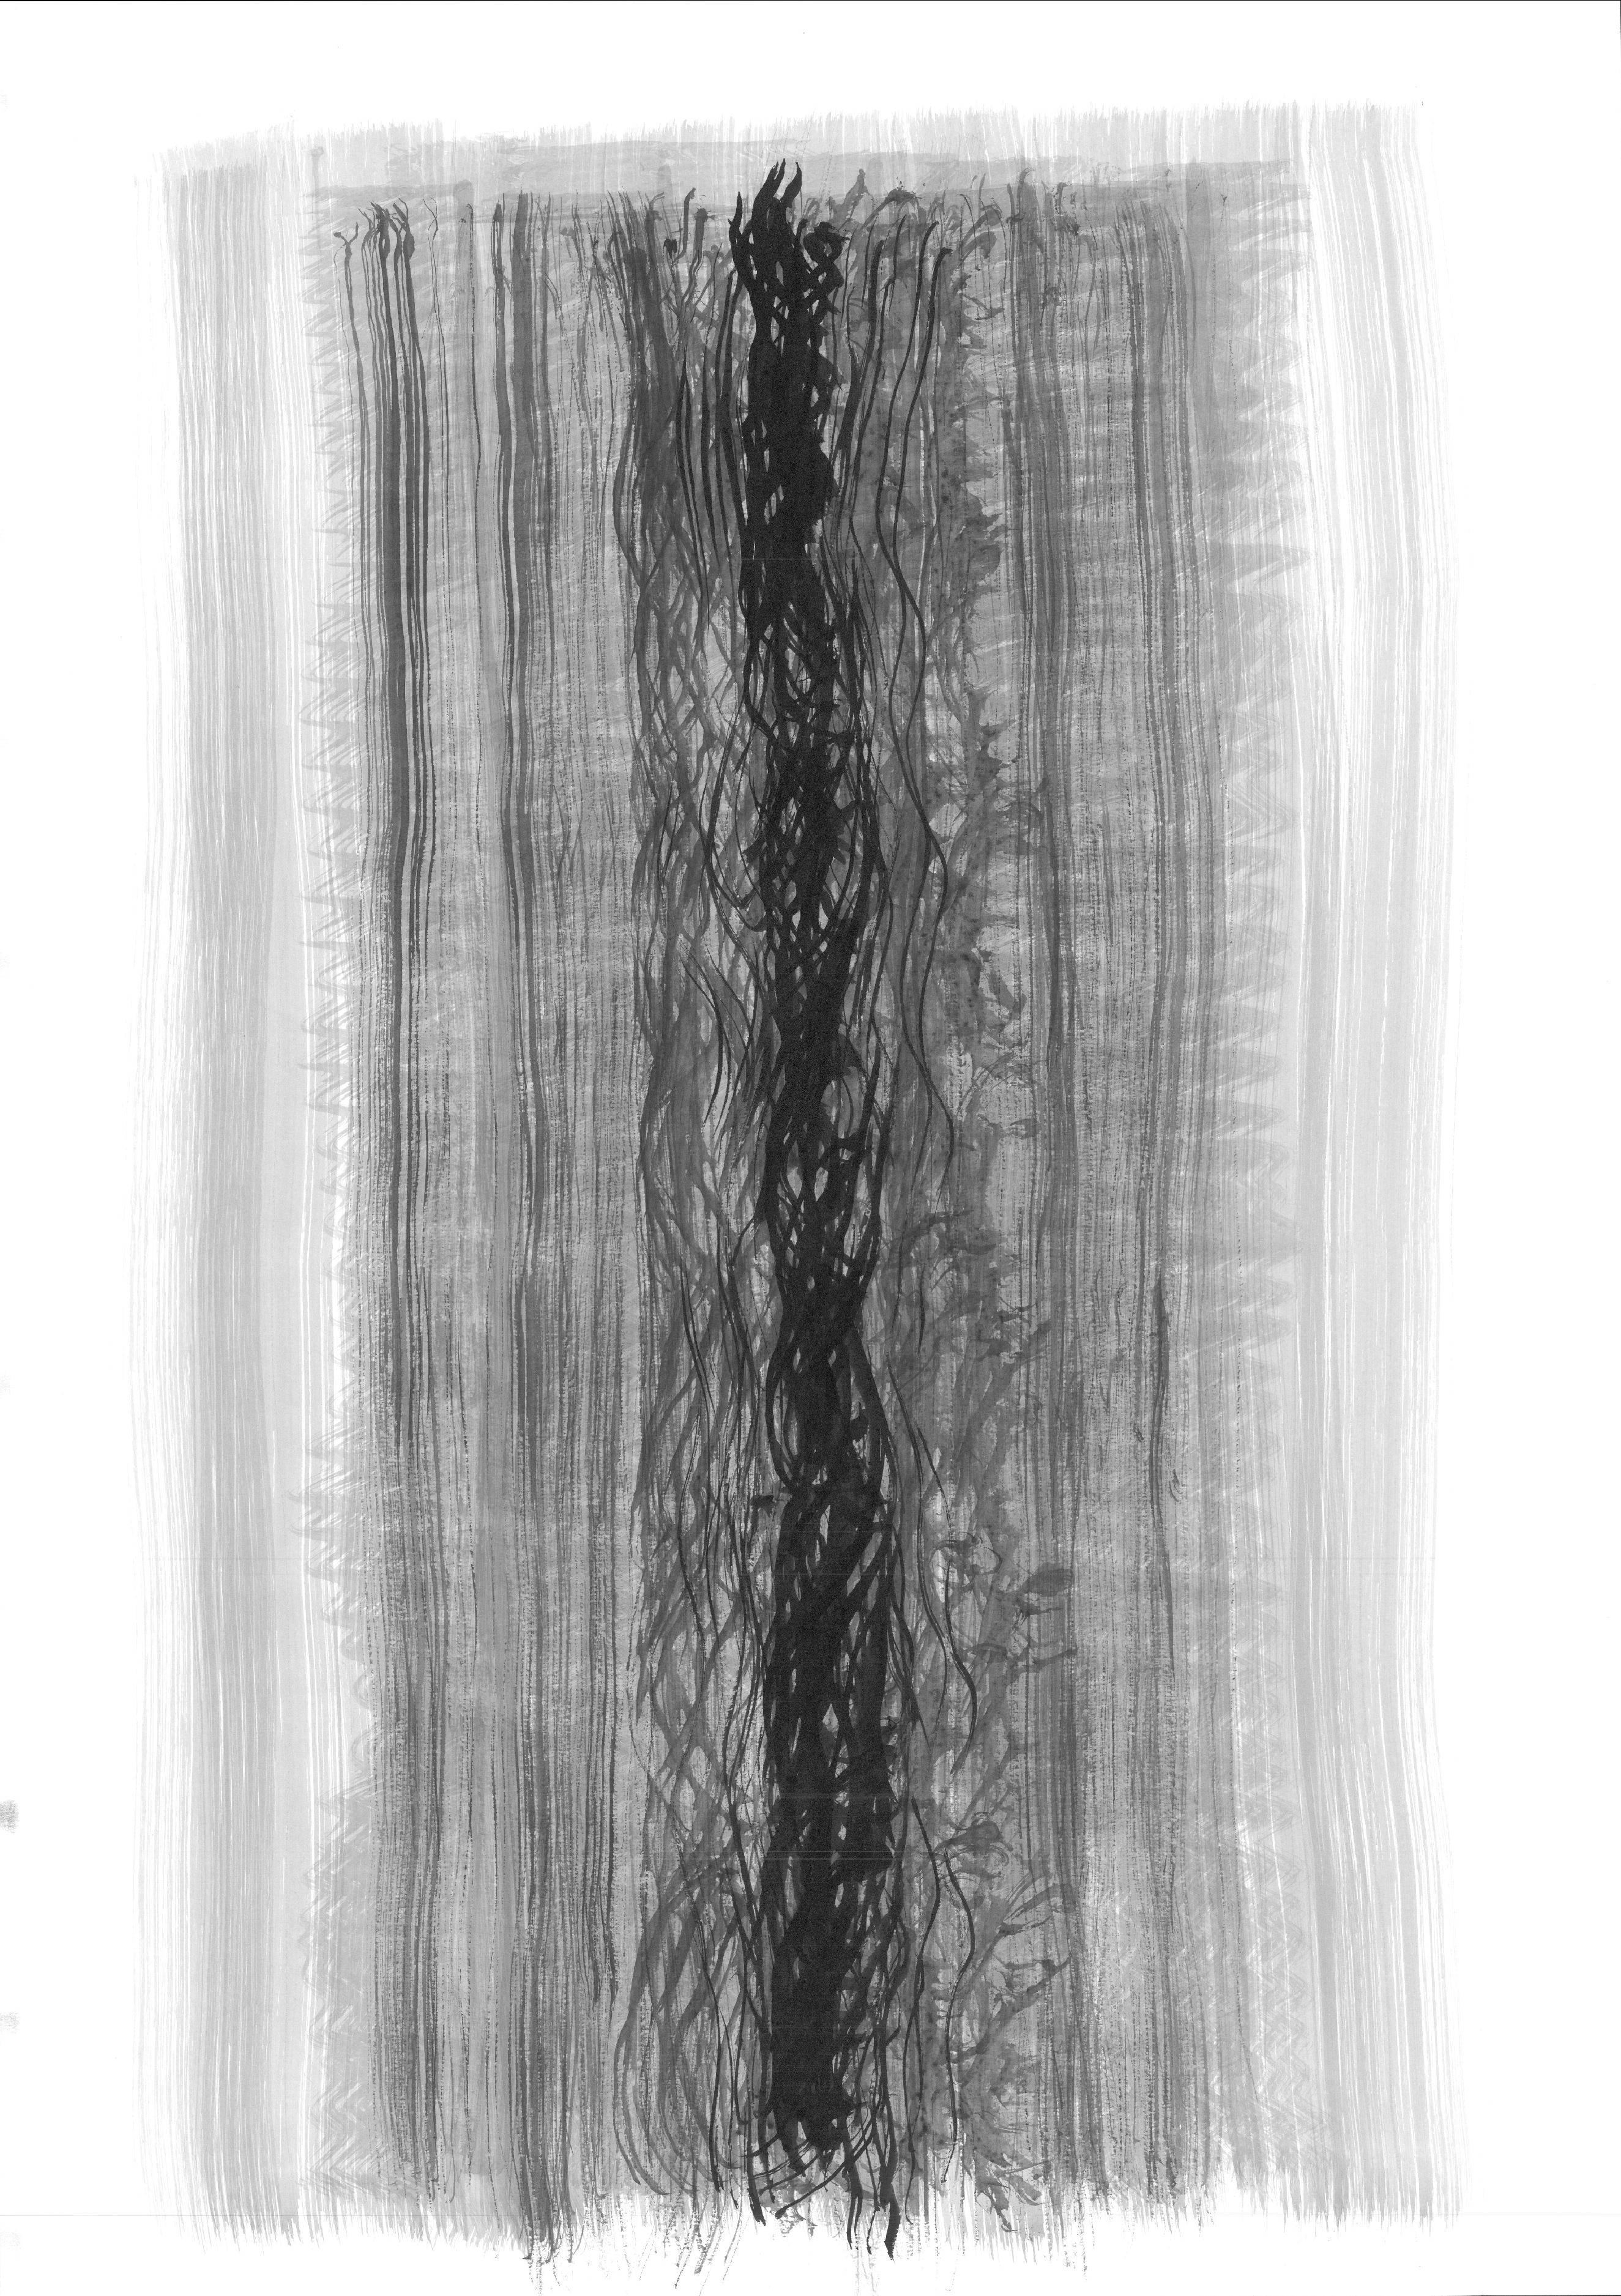 abstract drawing, black ink on paper, showing a gradient of grey to dark black and back to grey, with varying strokes